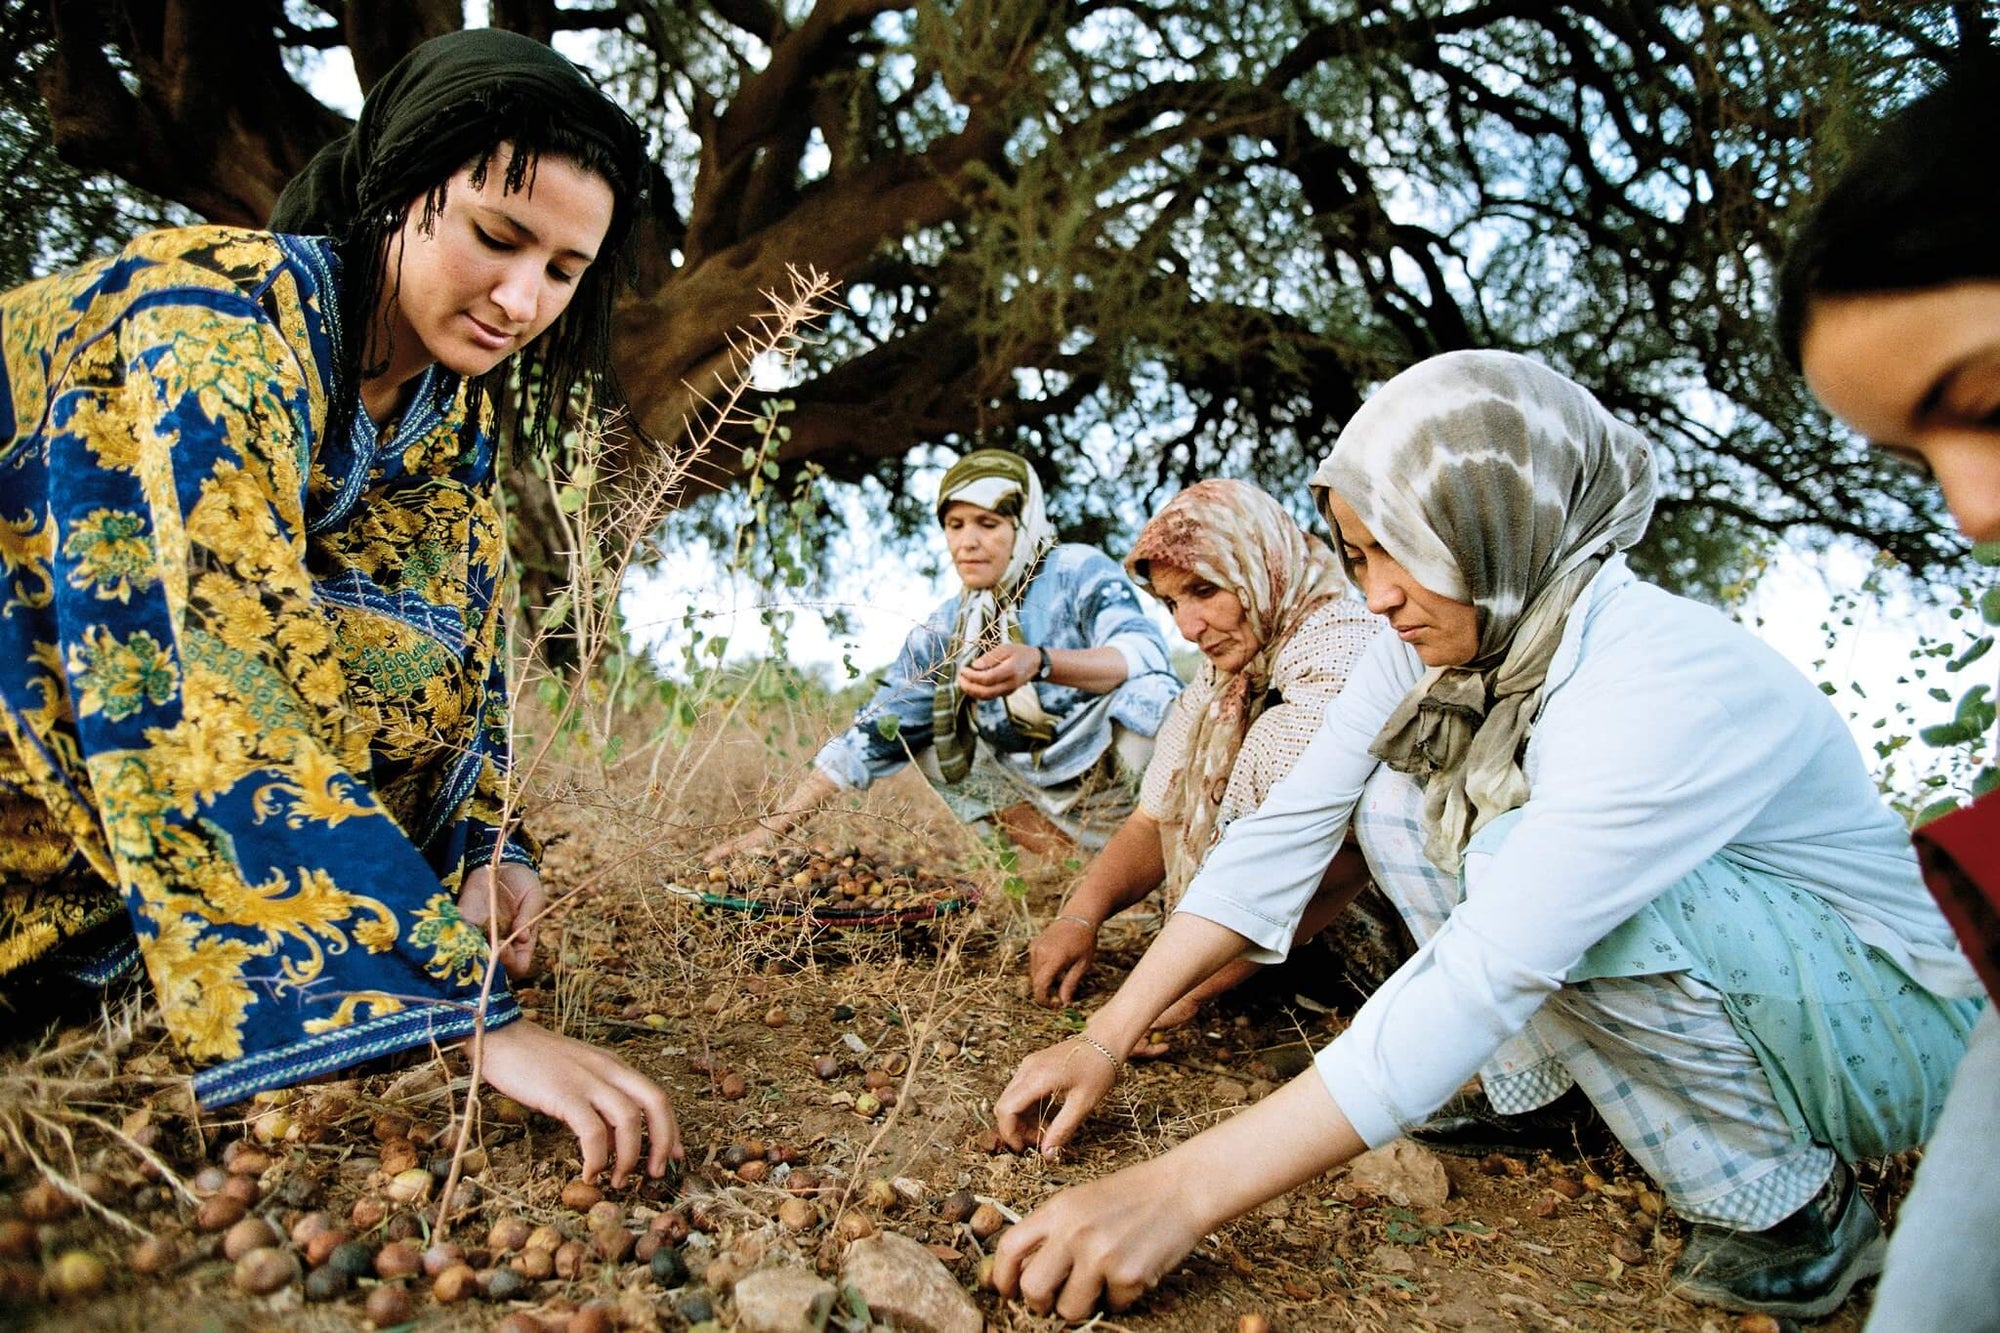 A group of women harvesting argan fruit next to a tree.